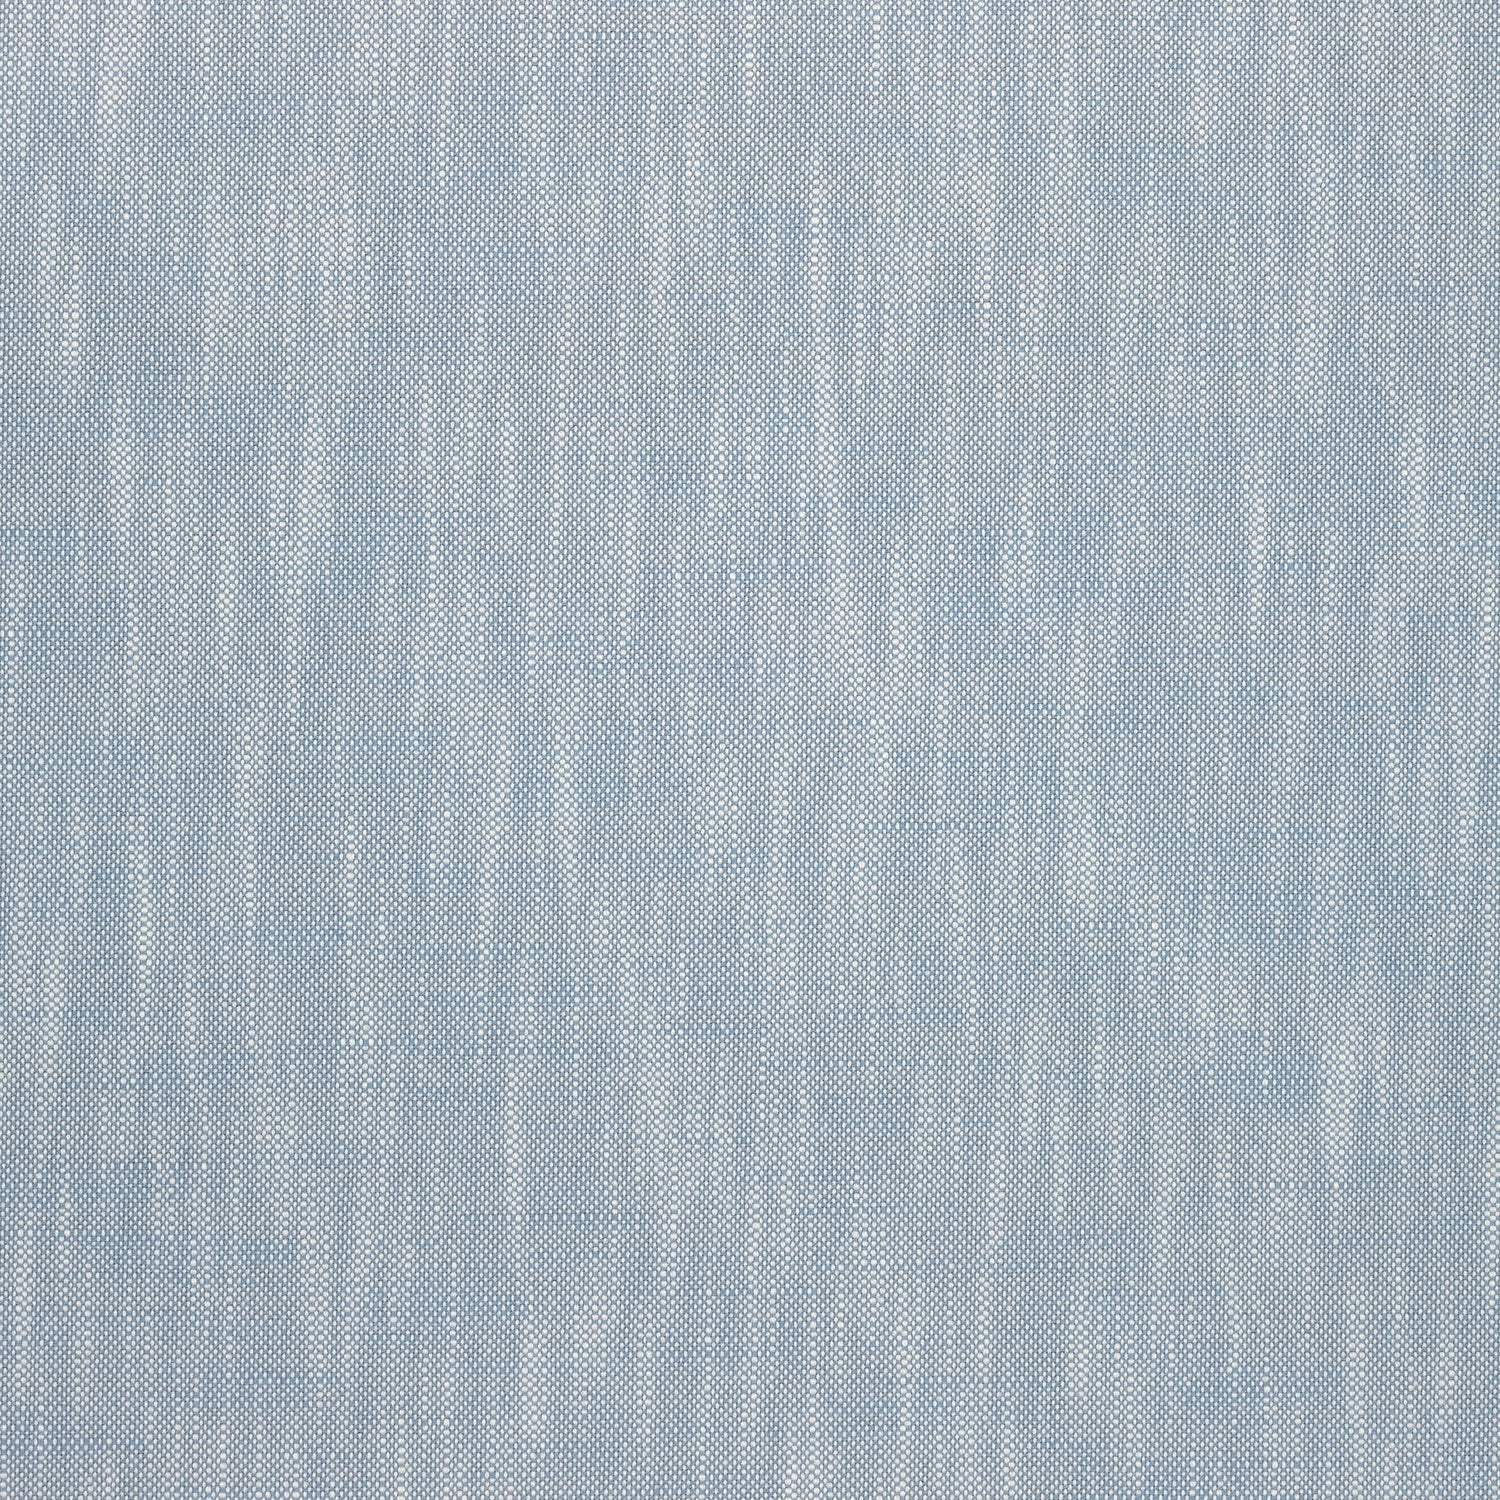 Bristol fabric in sky color - pattern number W73413 - by Thibaut in the Landmark Textures collection